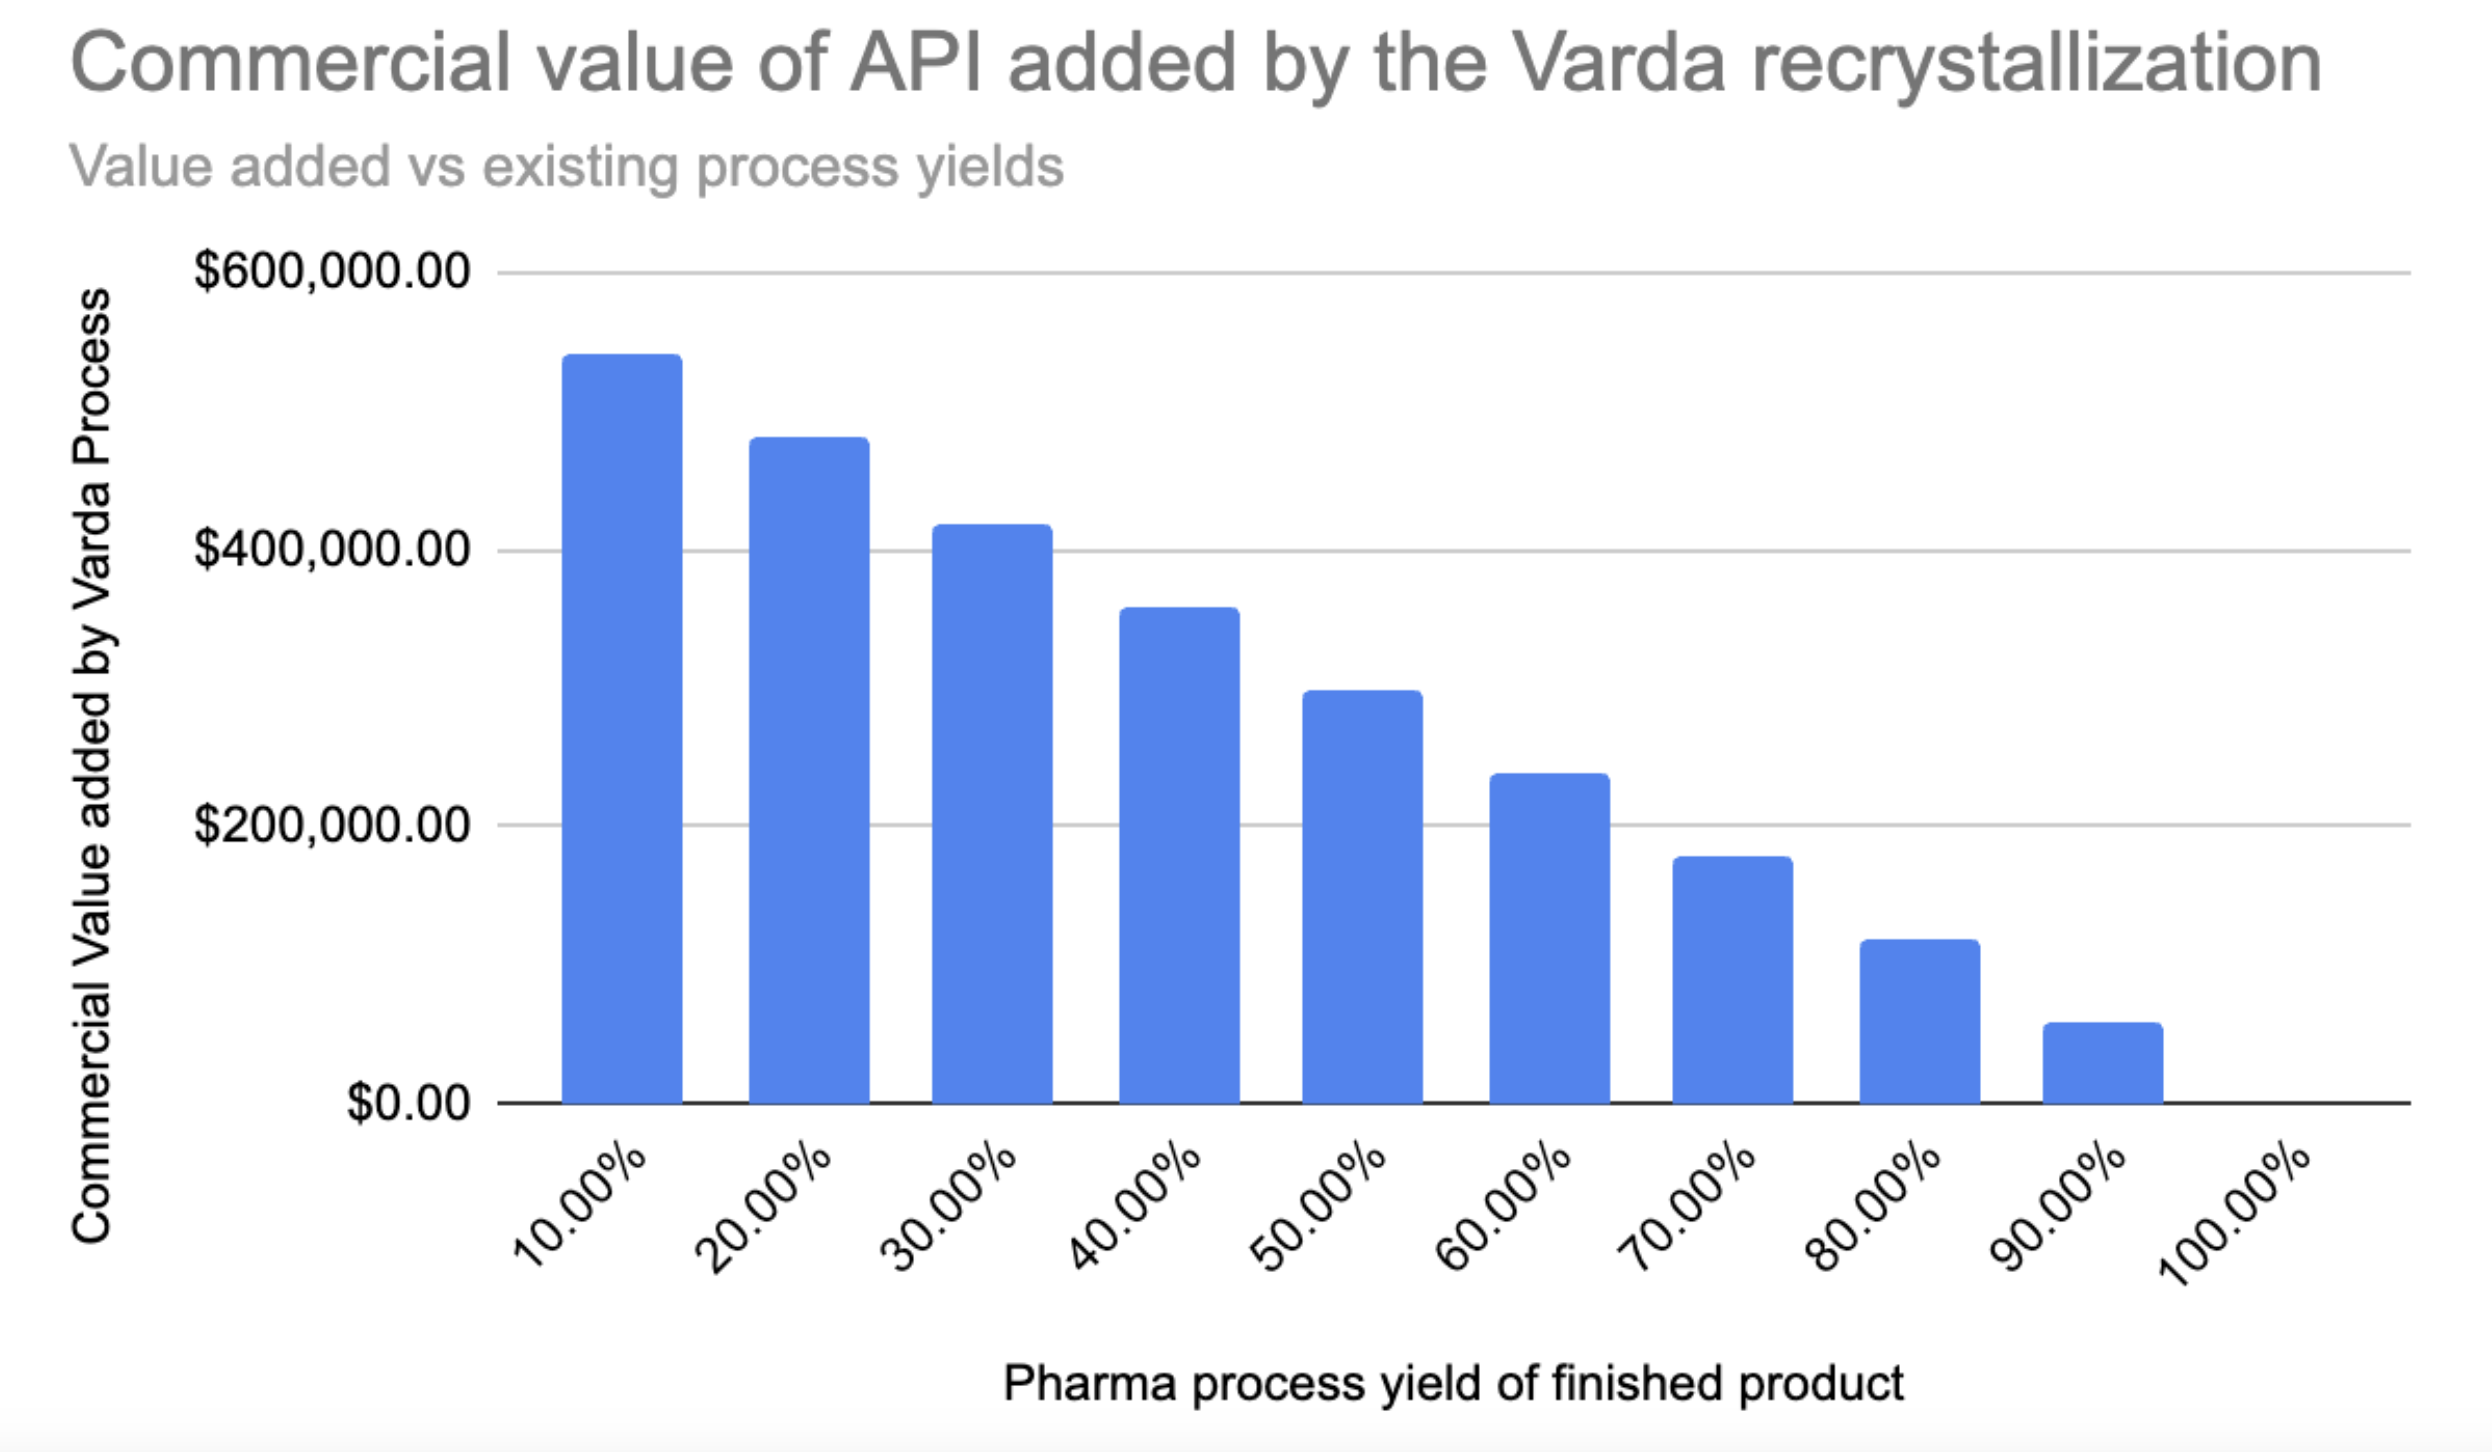 Commercial Value added by Varda vs terrestrial process yield